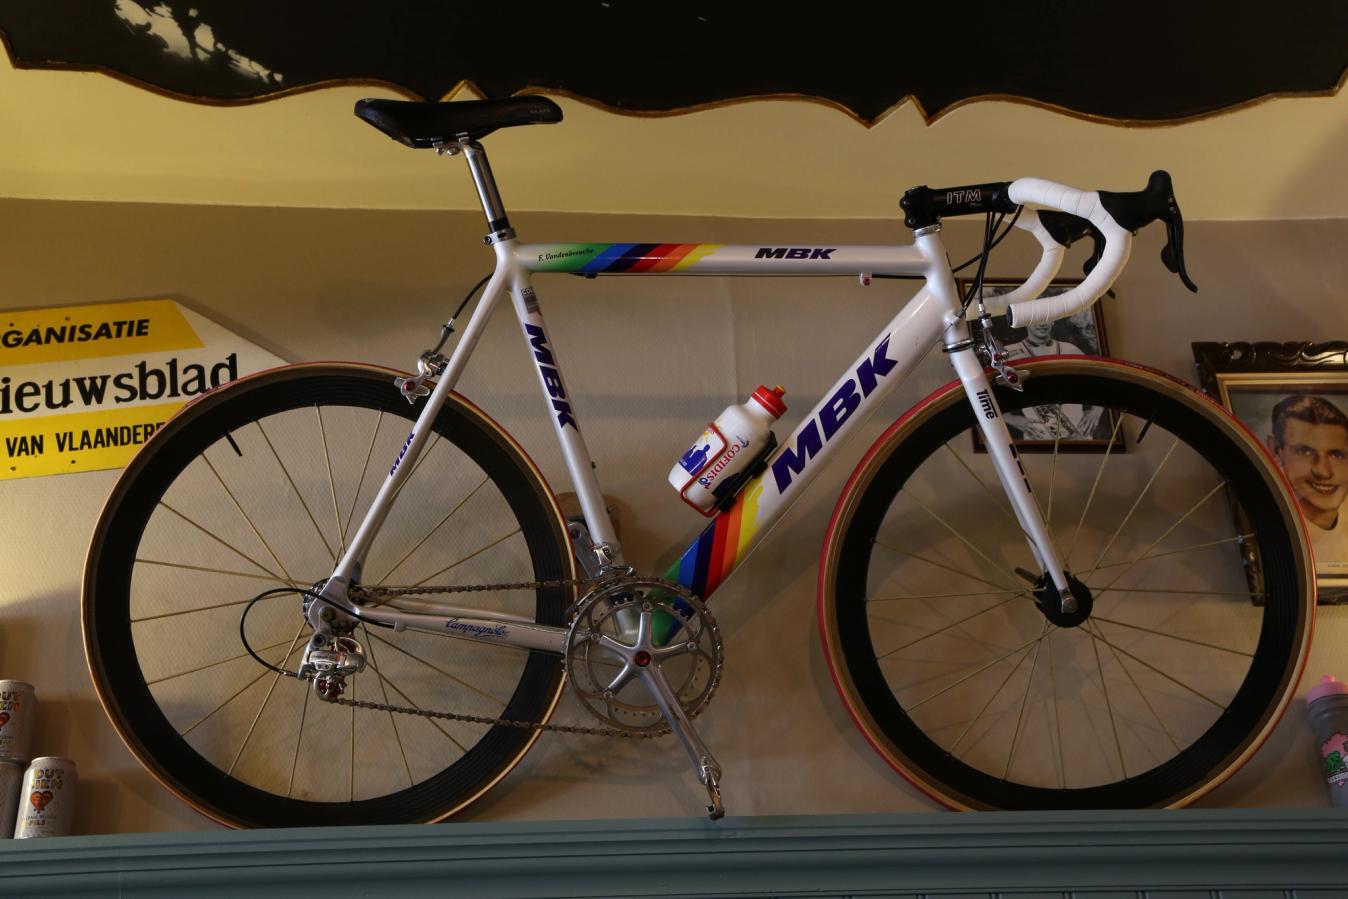 The late Frank Vandenbroucke, a friend of Penne, rode this bike in the Amstel Gold Race and Classica San Sebastian in 1999